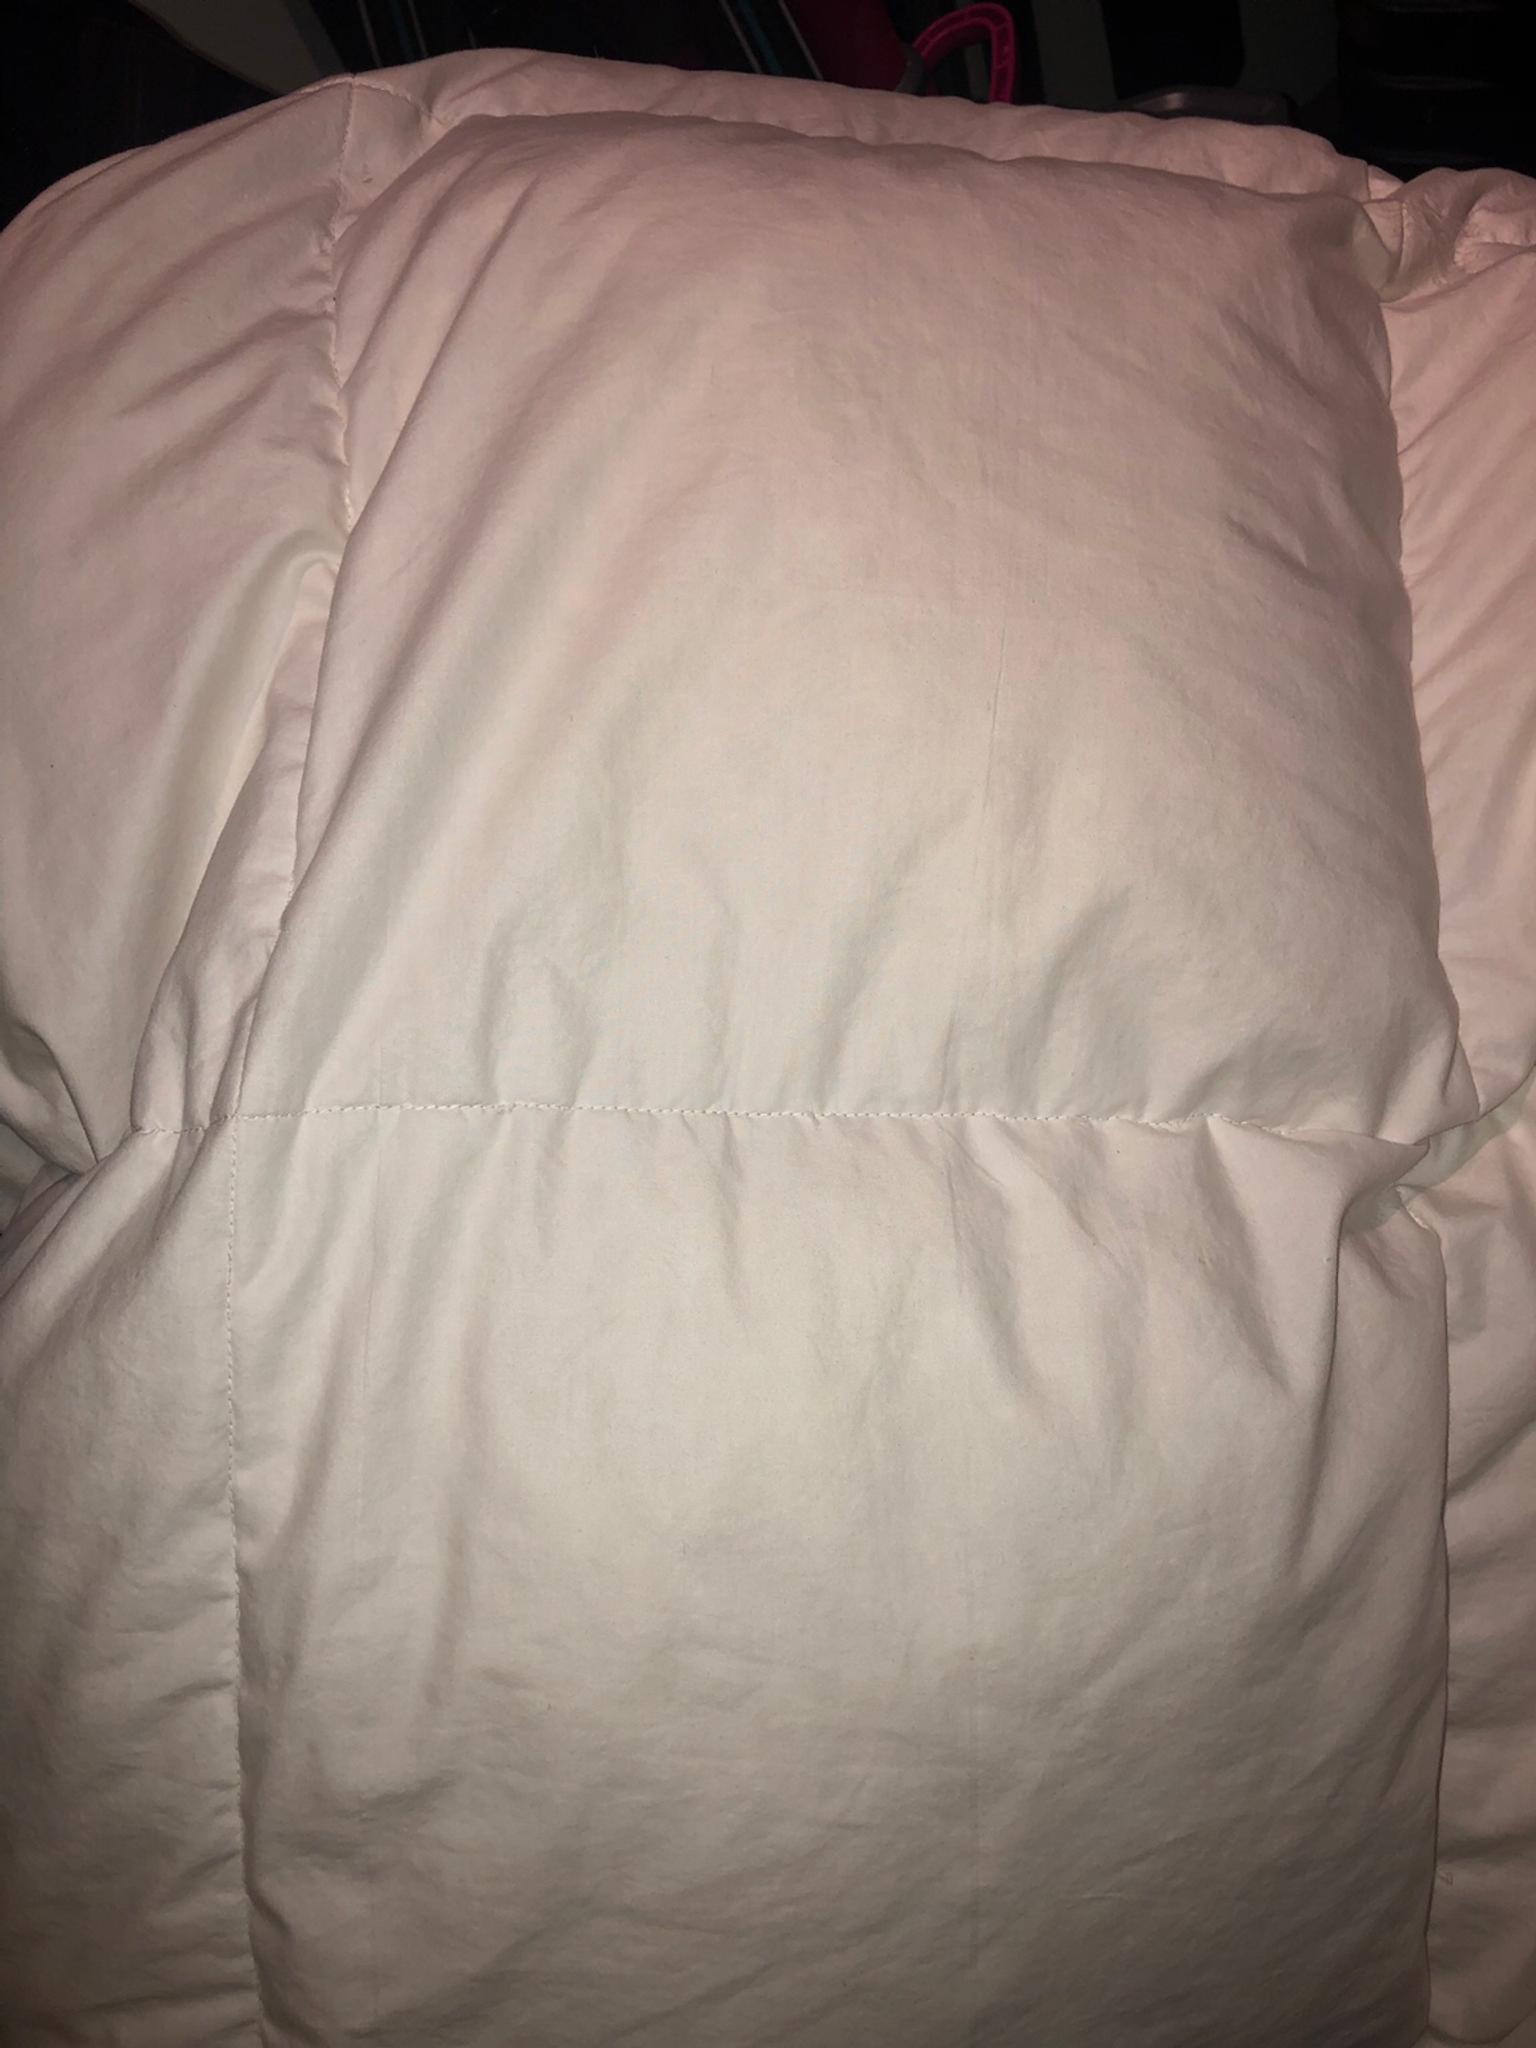 John Lewis Duck Feather Duvet And Pillows X 2 In N1 London For